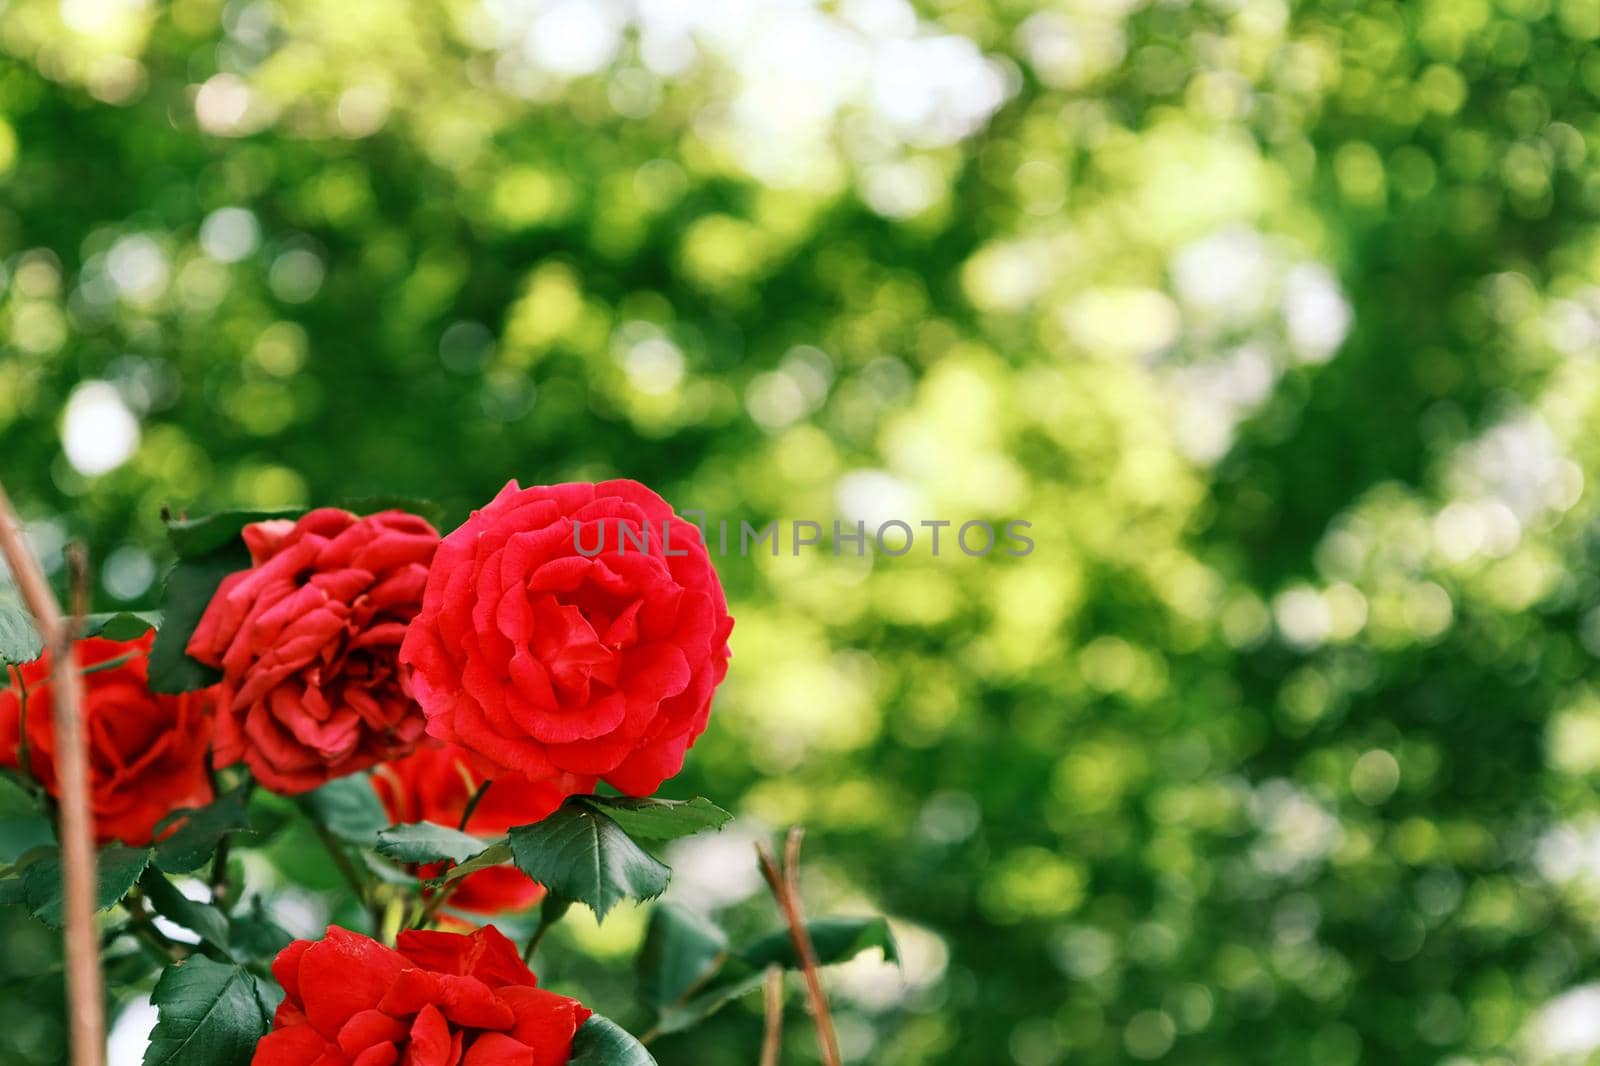 Beautiful red rose on blurred background